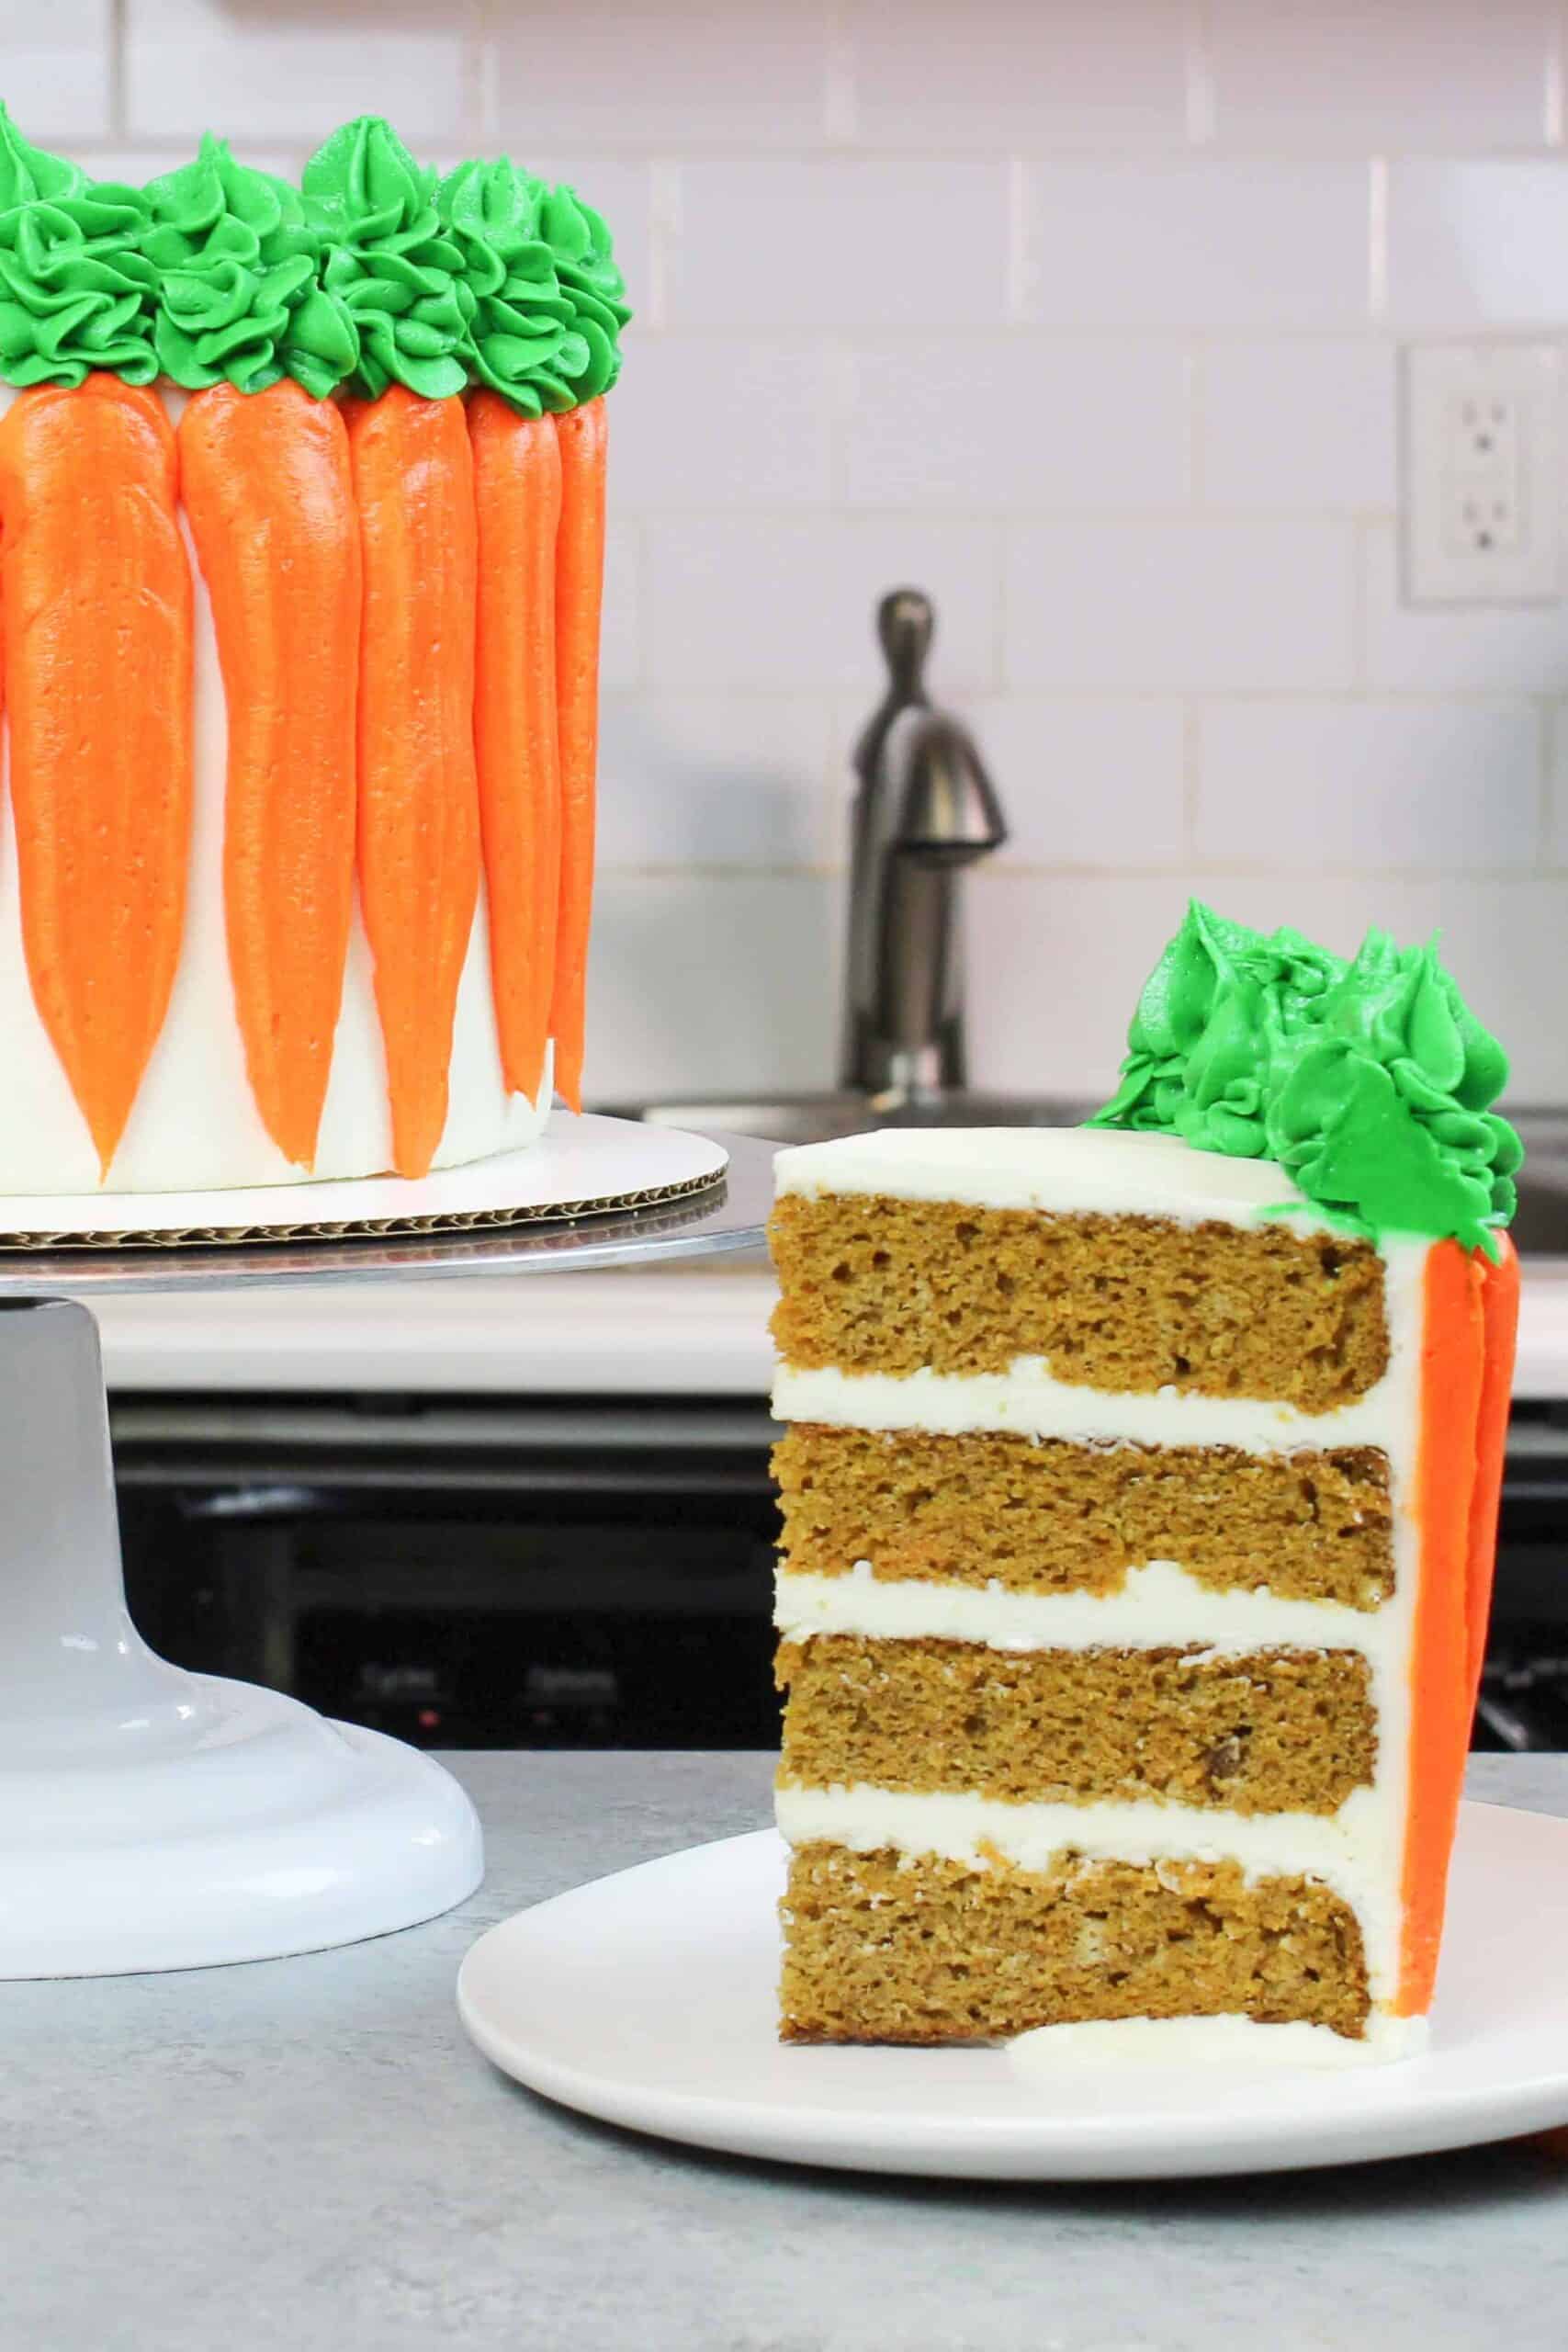 Carrot Cake Recipe - The Girl Who Ate Everything